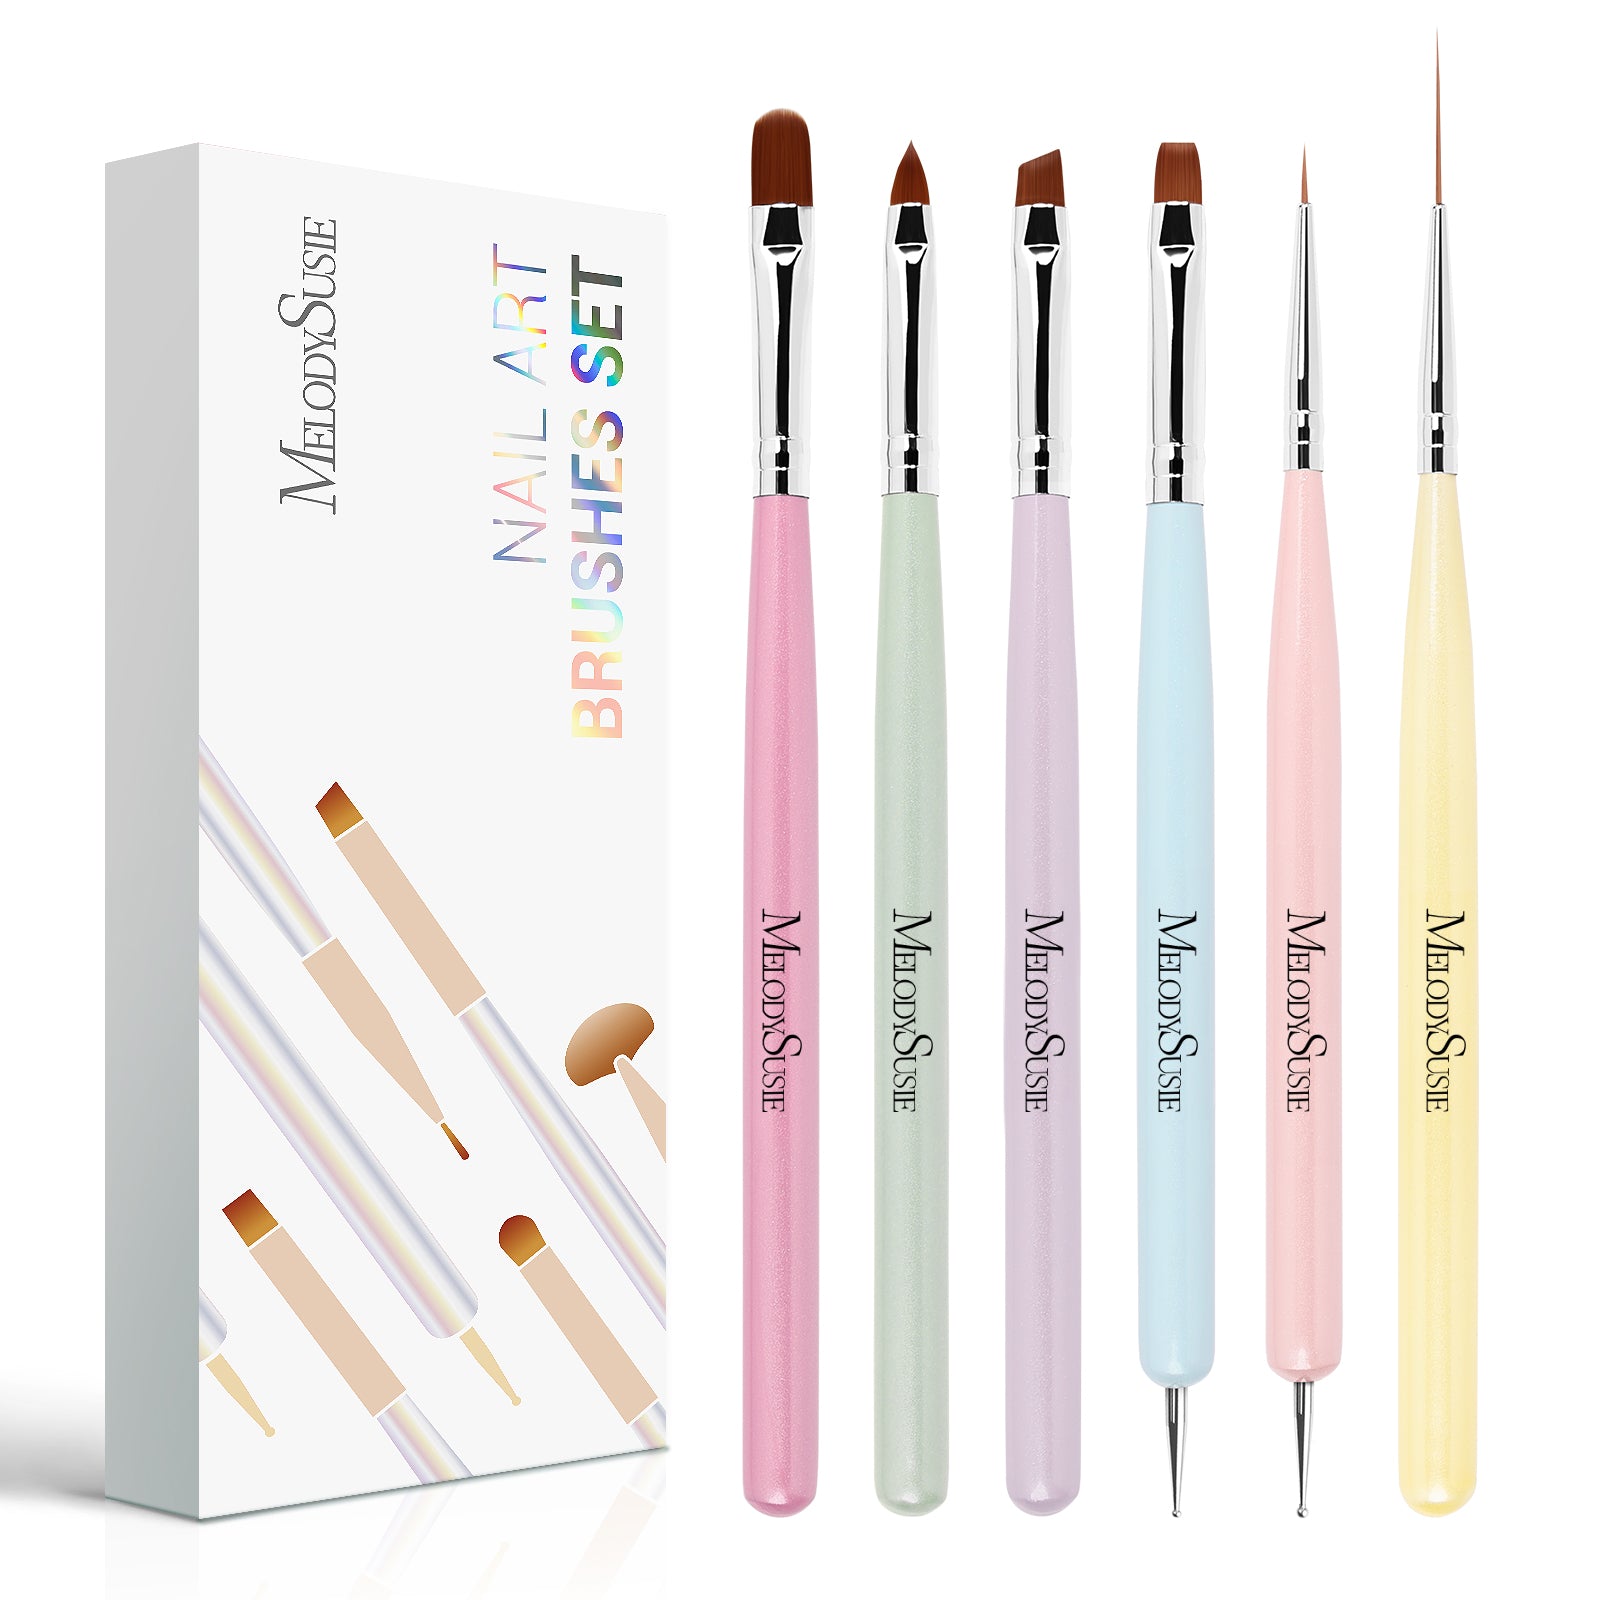 WOKOTO 5Pcs Nail Art Brush Pens Set Nail Ombre Gradient Liner Brushes  French Nail Painting Brushes Acrylic Brushes For Uv Gel Nail Art Polish  Brushes Kit With Wood Handle : Amazon.in: Beauty